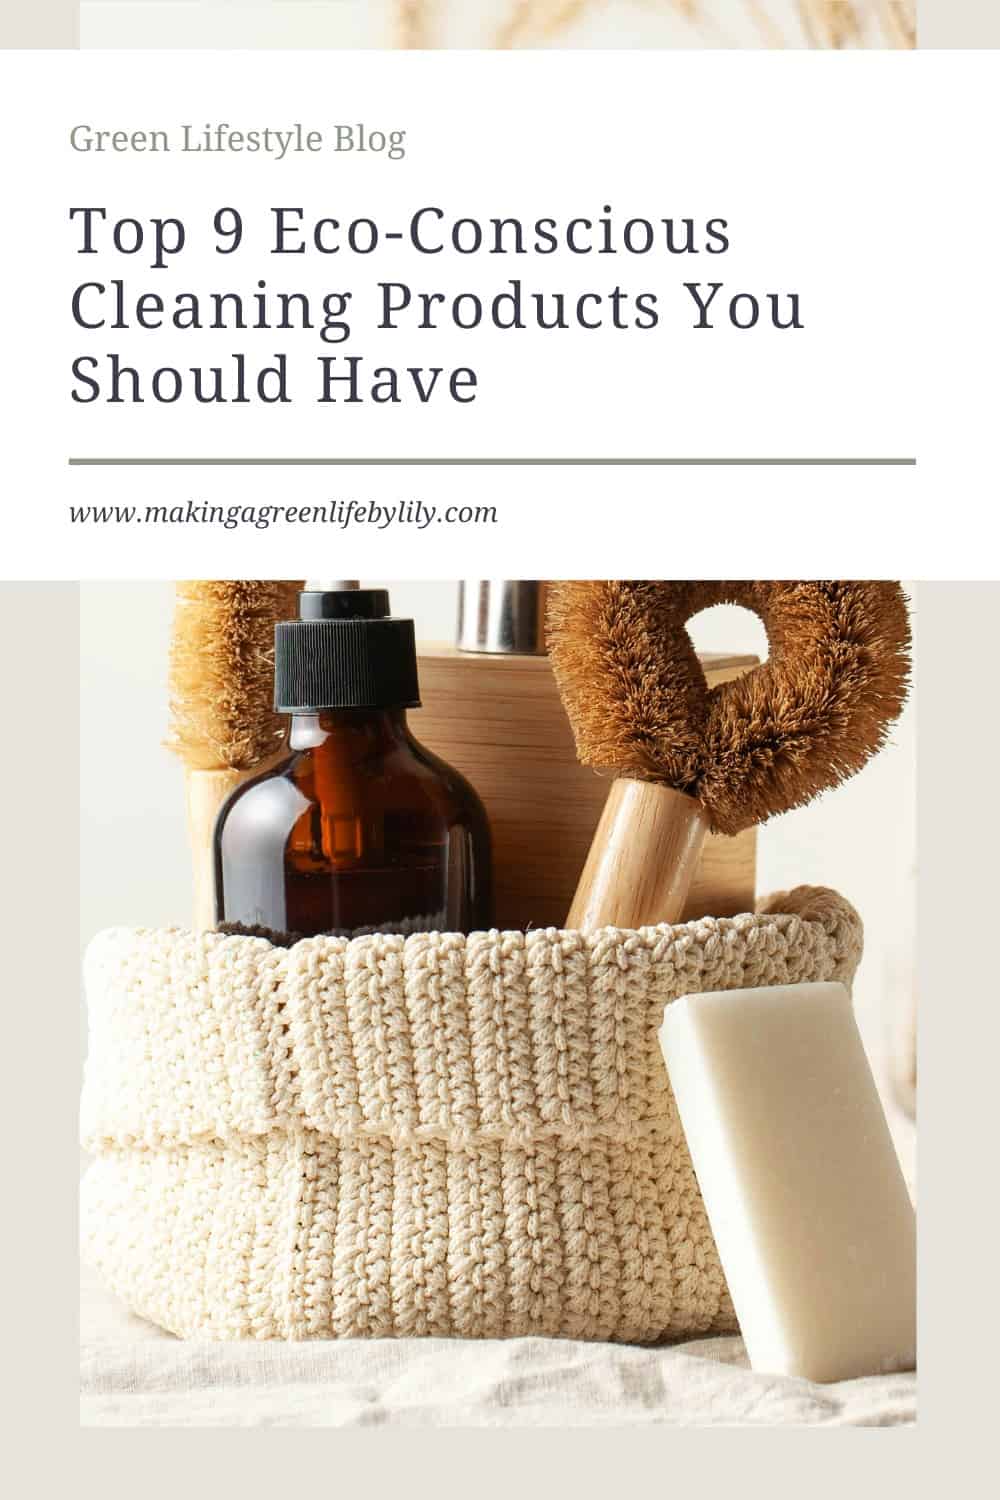 Top 9 Eco-Conscious Cleaning Products You Should Have